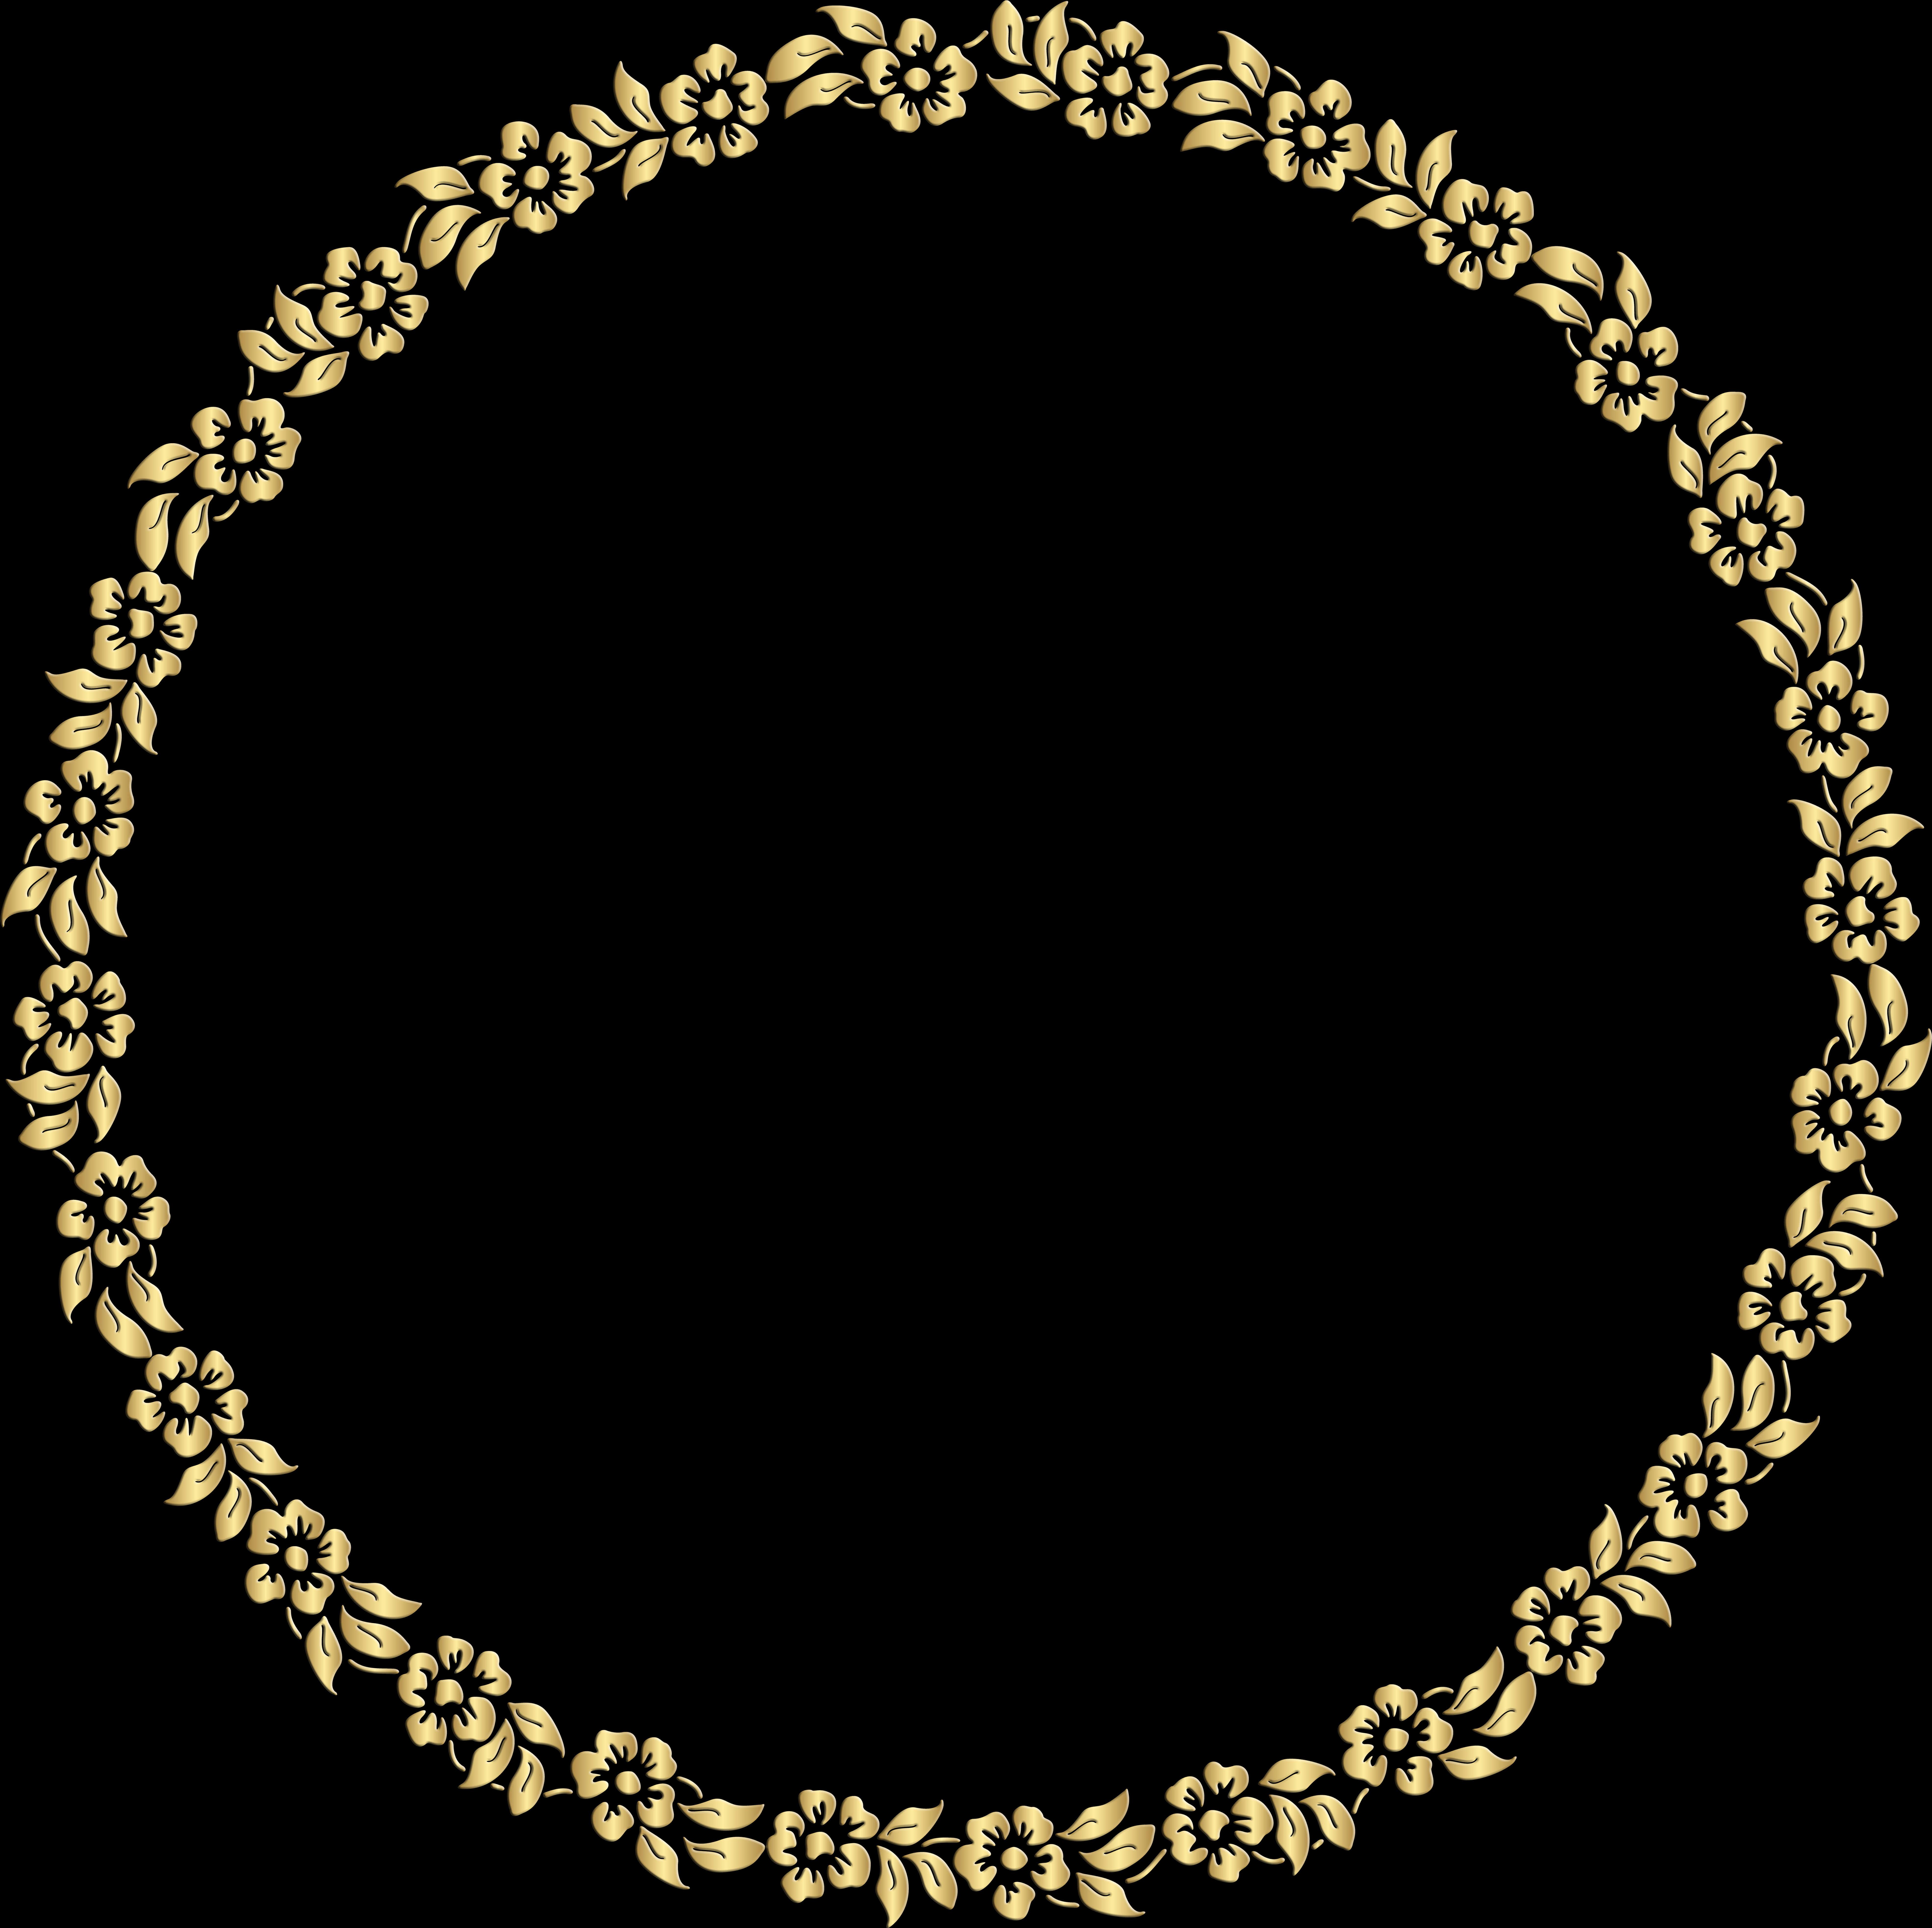 A Circular Gold Frame With Flowers On It